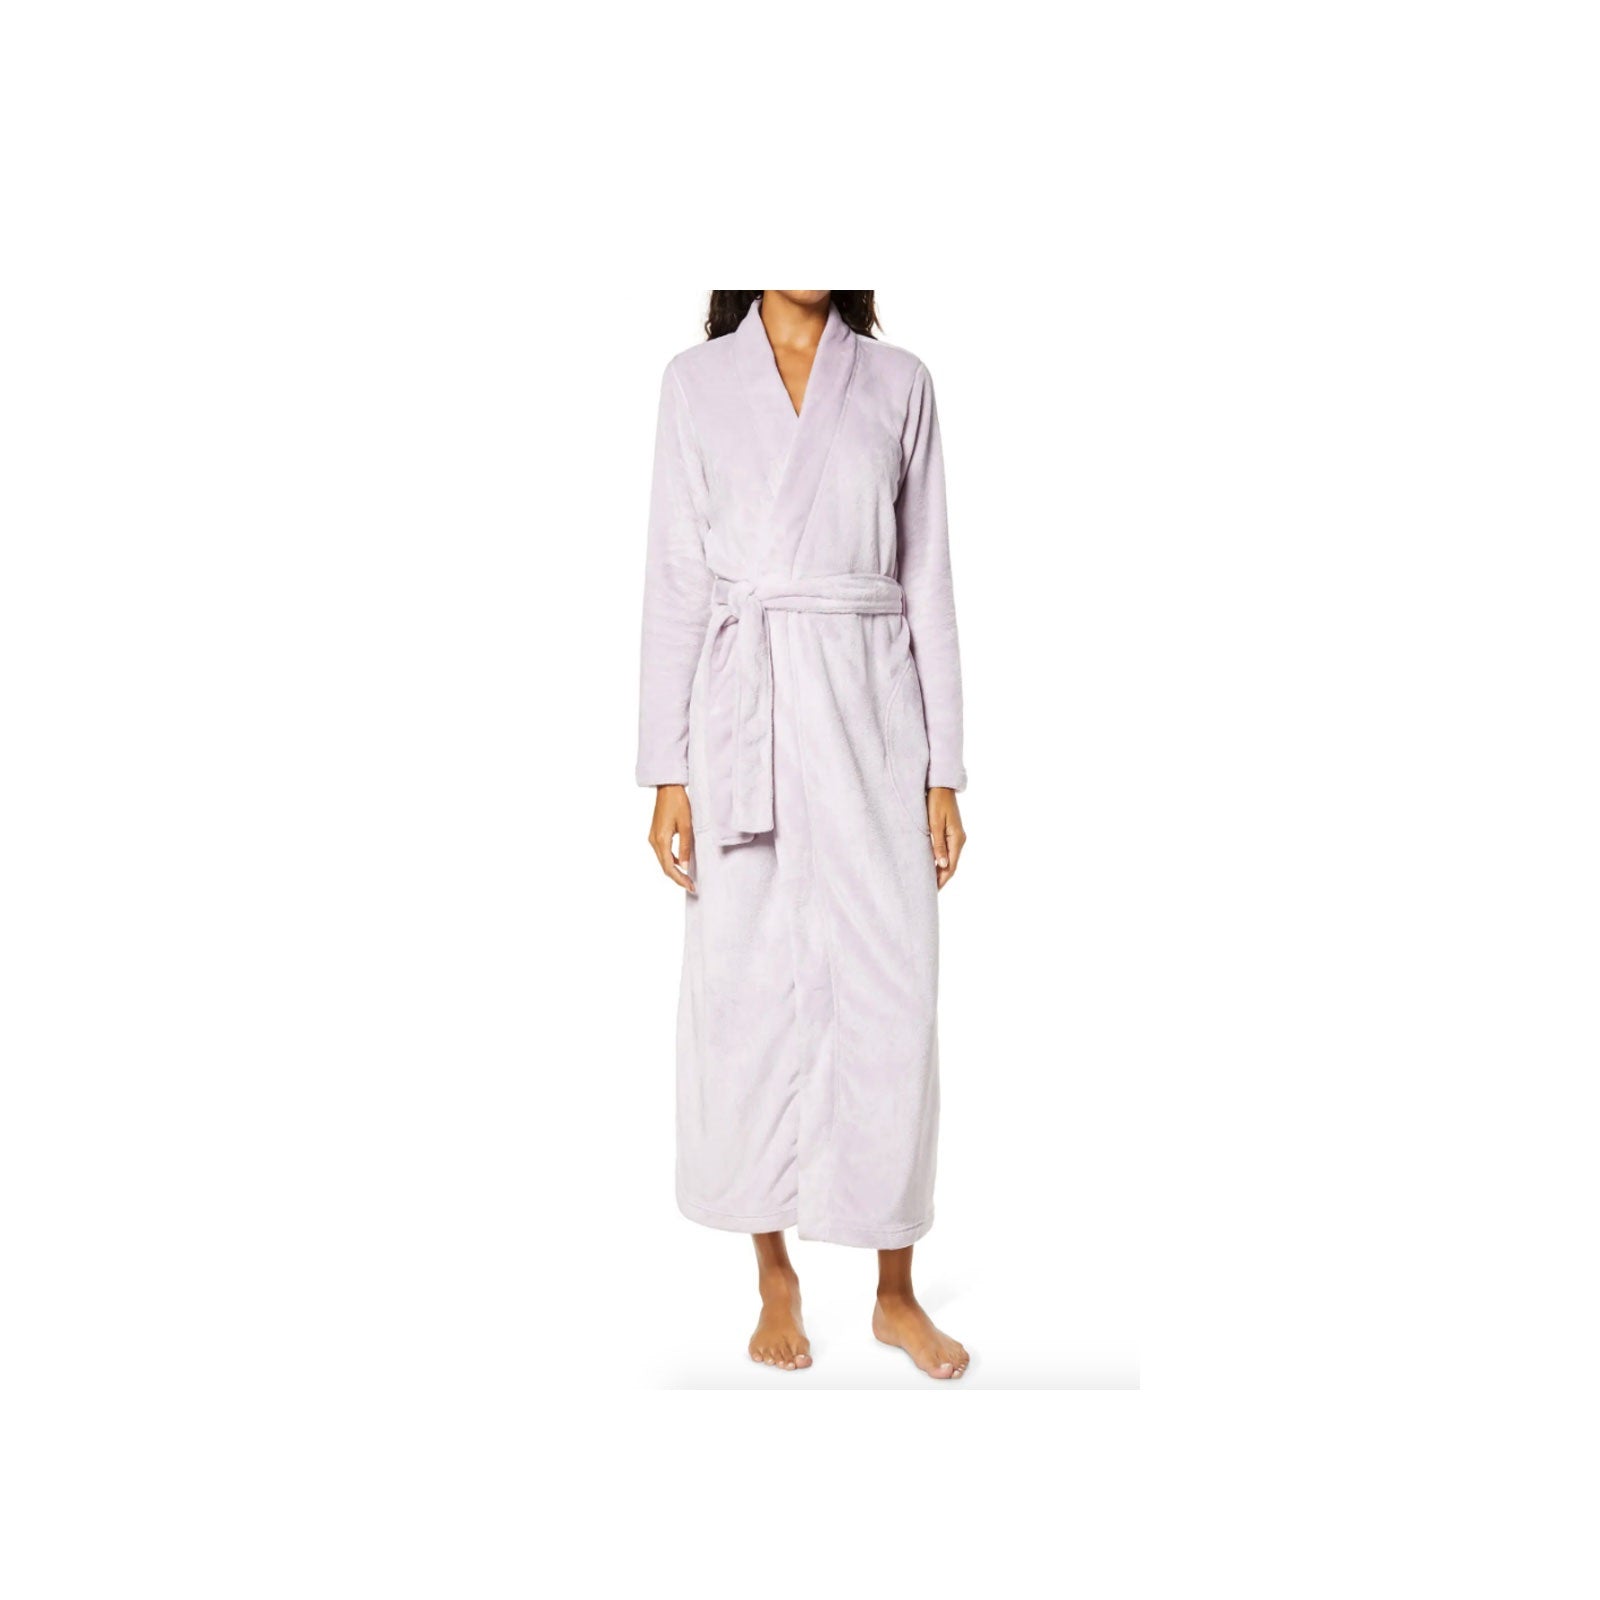 UGG Marlow Robe-Lilac Frost